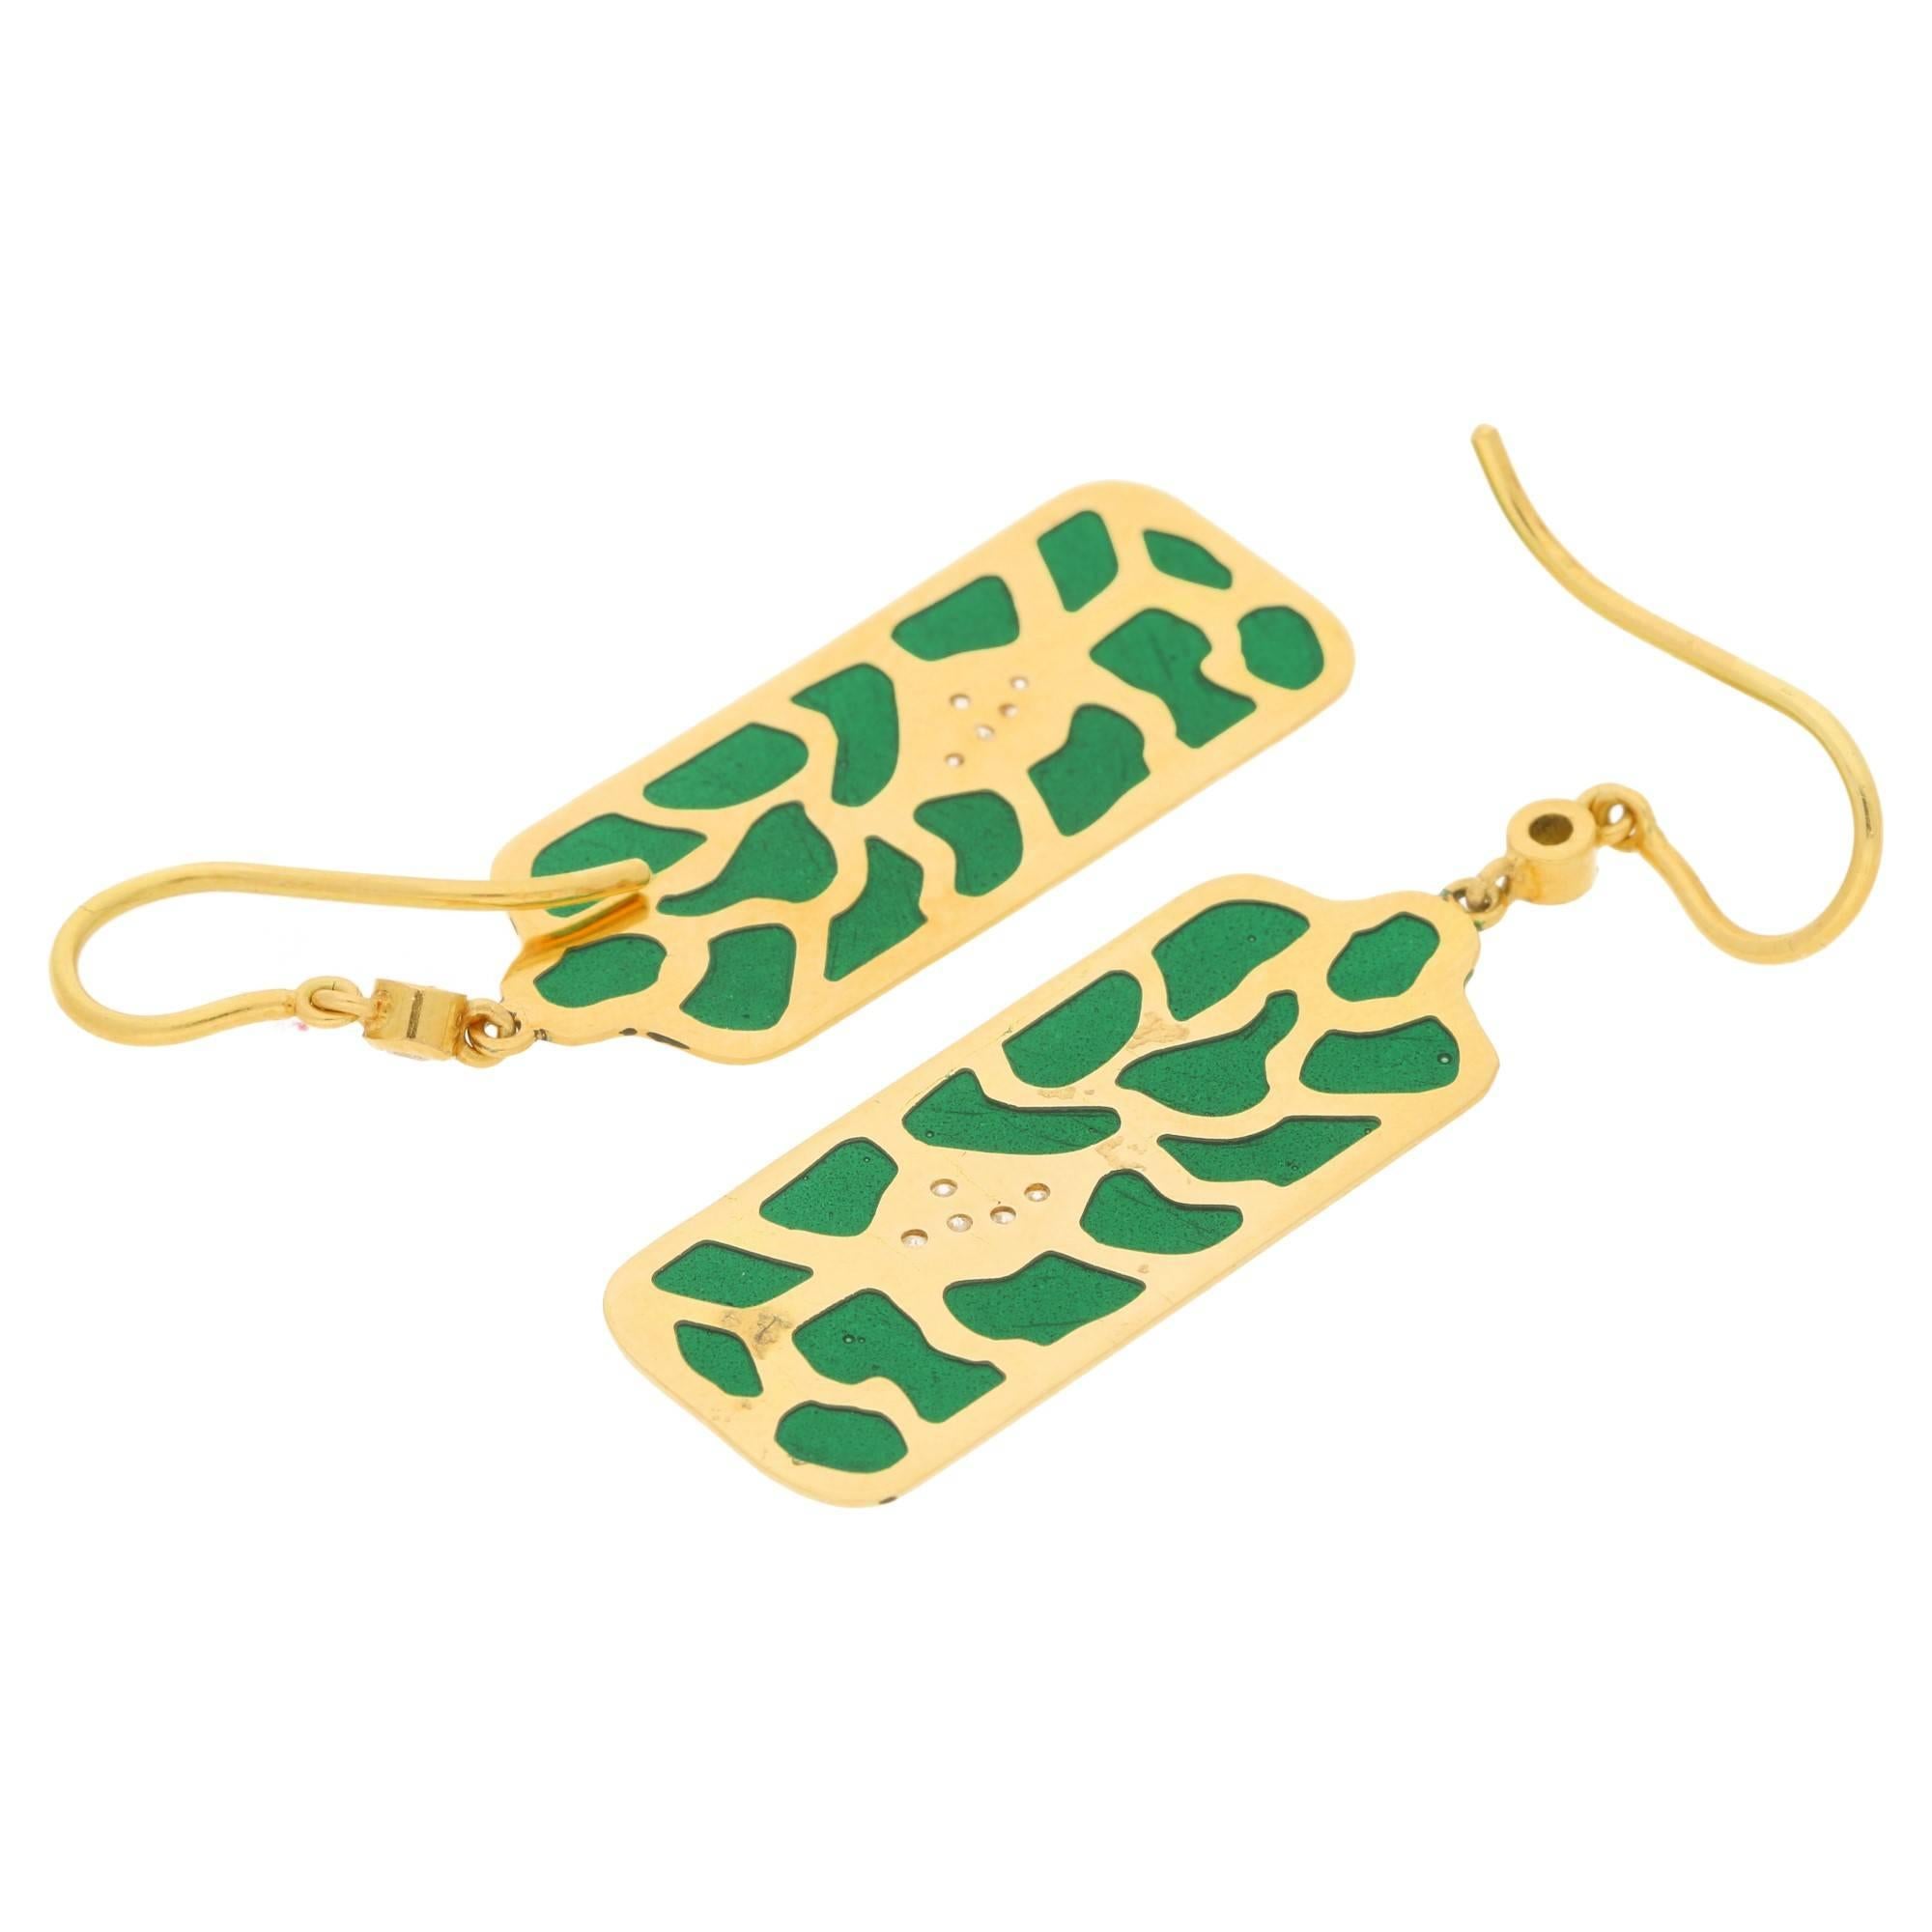 Estimated total diamond weight: 0.16cts.
An unusual pair of 18ct yellow gold plique-a-jour enamel and diamond drop earrings. With a large panel of 18ct yellow gold with cut-outs filled with green plique-a-jour enamel and one with five pave set round